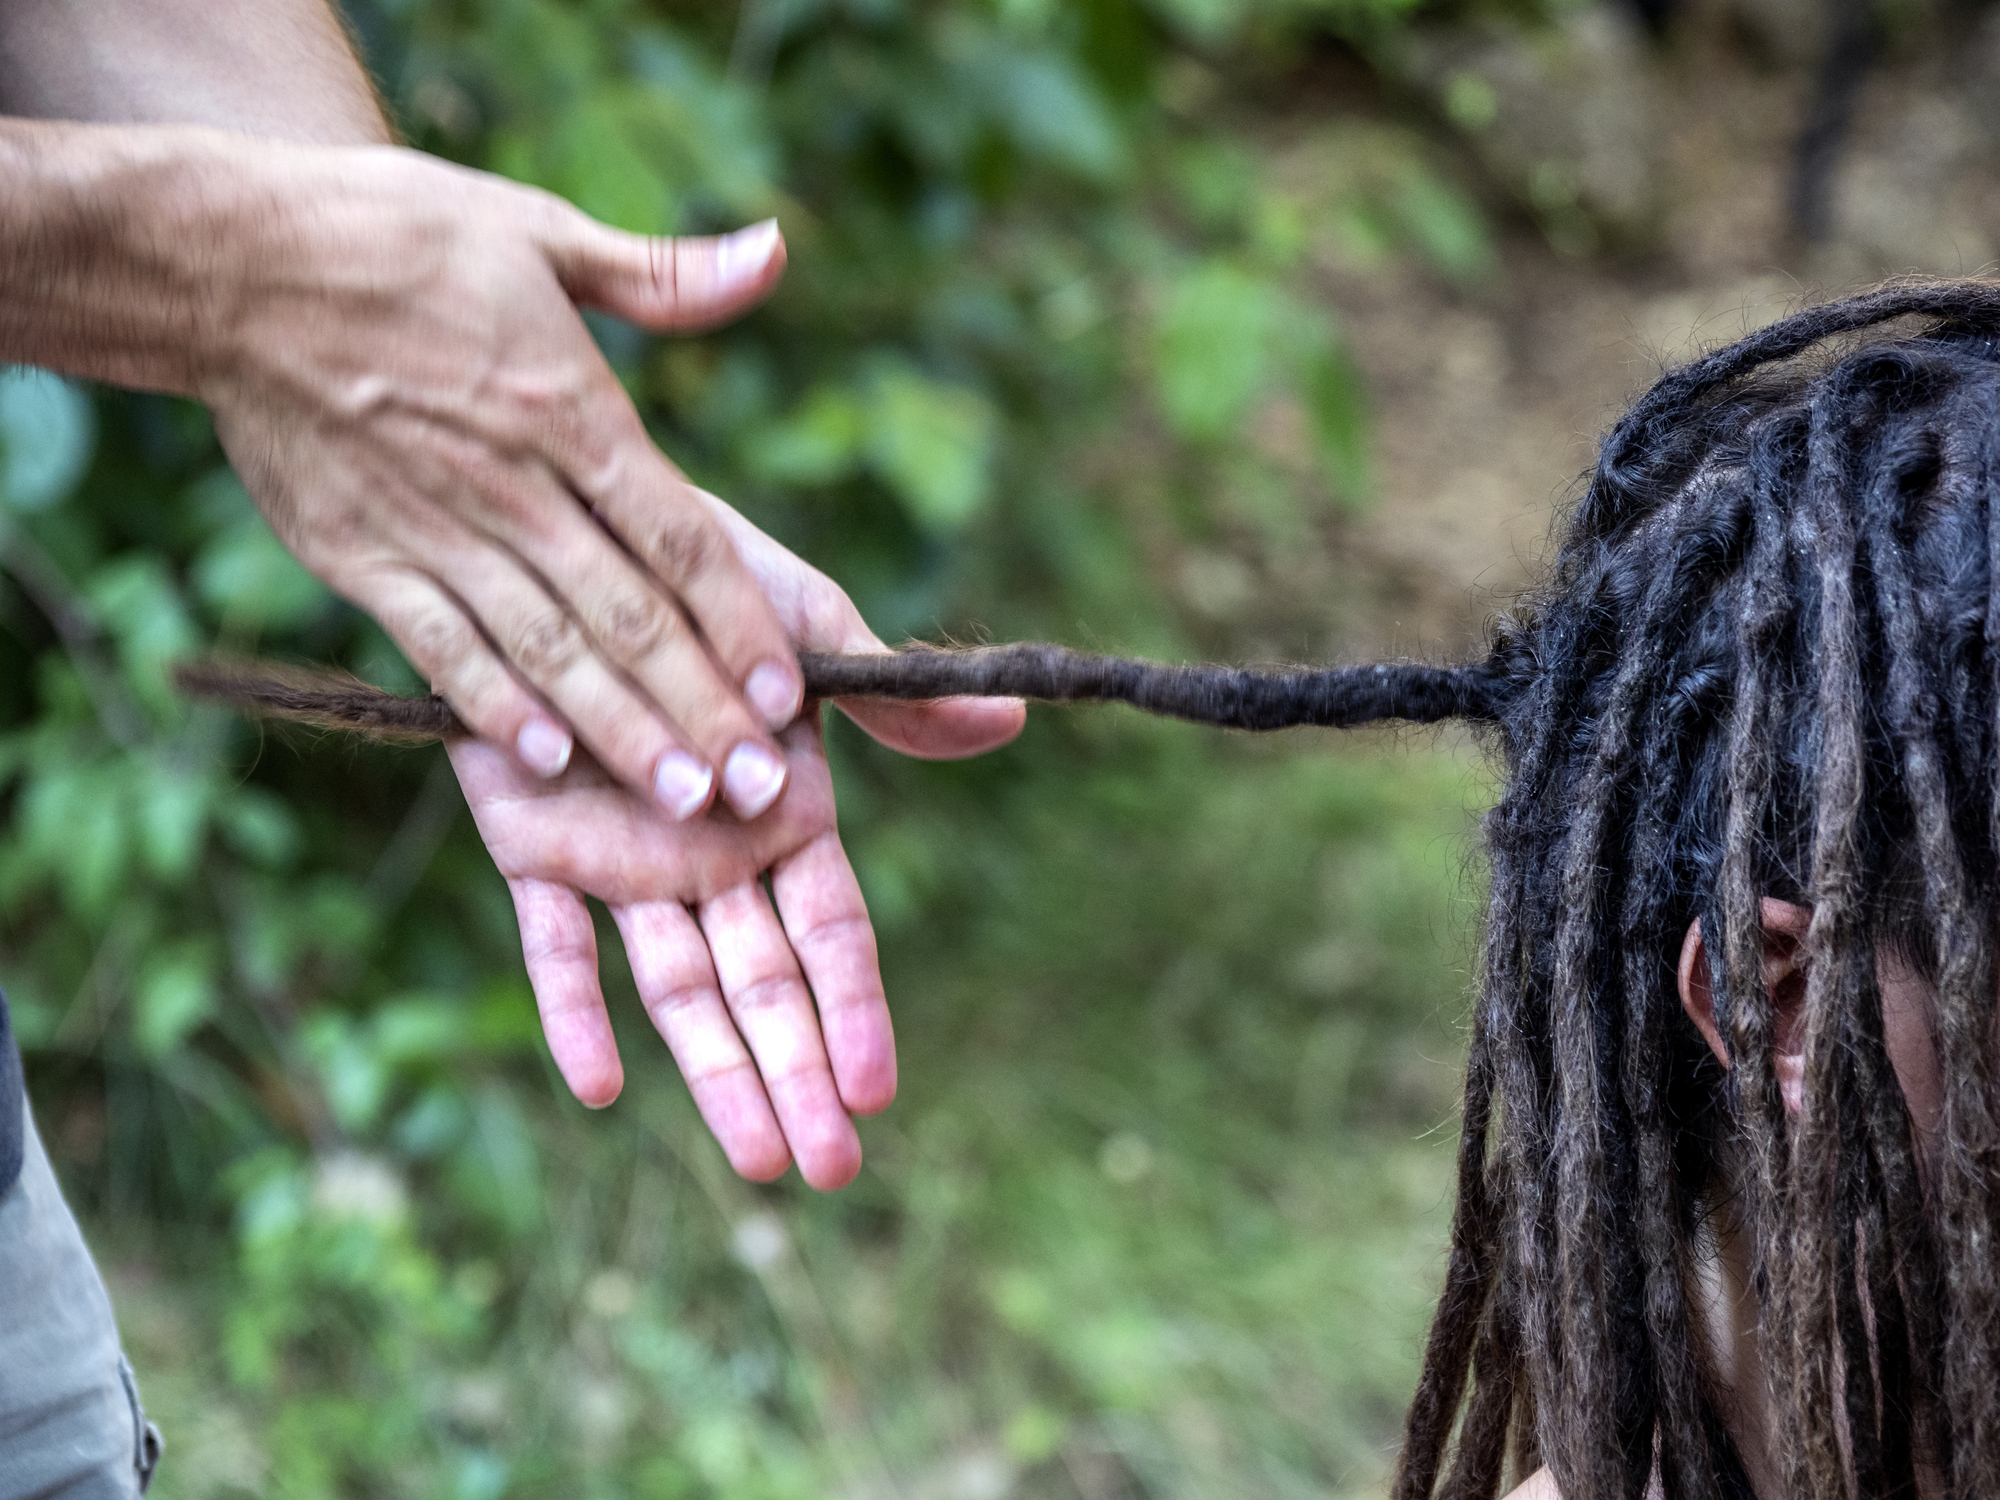 Illinois Man Says He Was Fired From Trucking Company For Not Cutting His Dreadlocks Despite White Employees Being Allowed To Have Long Hair